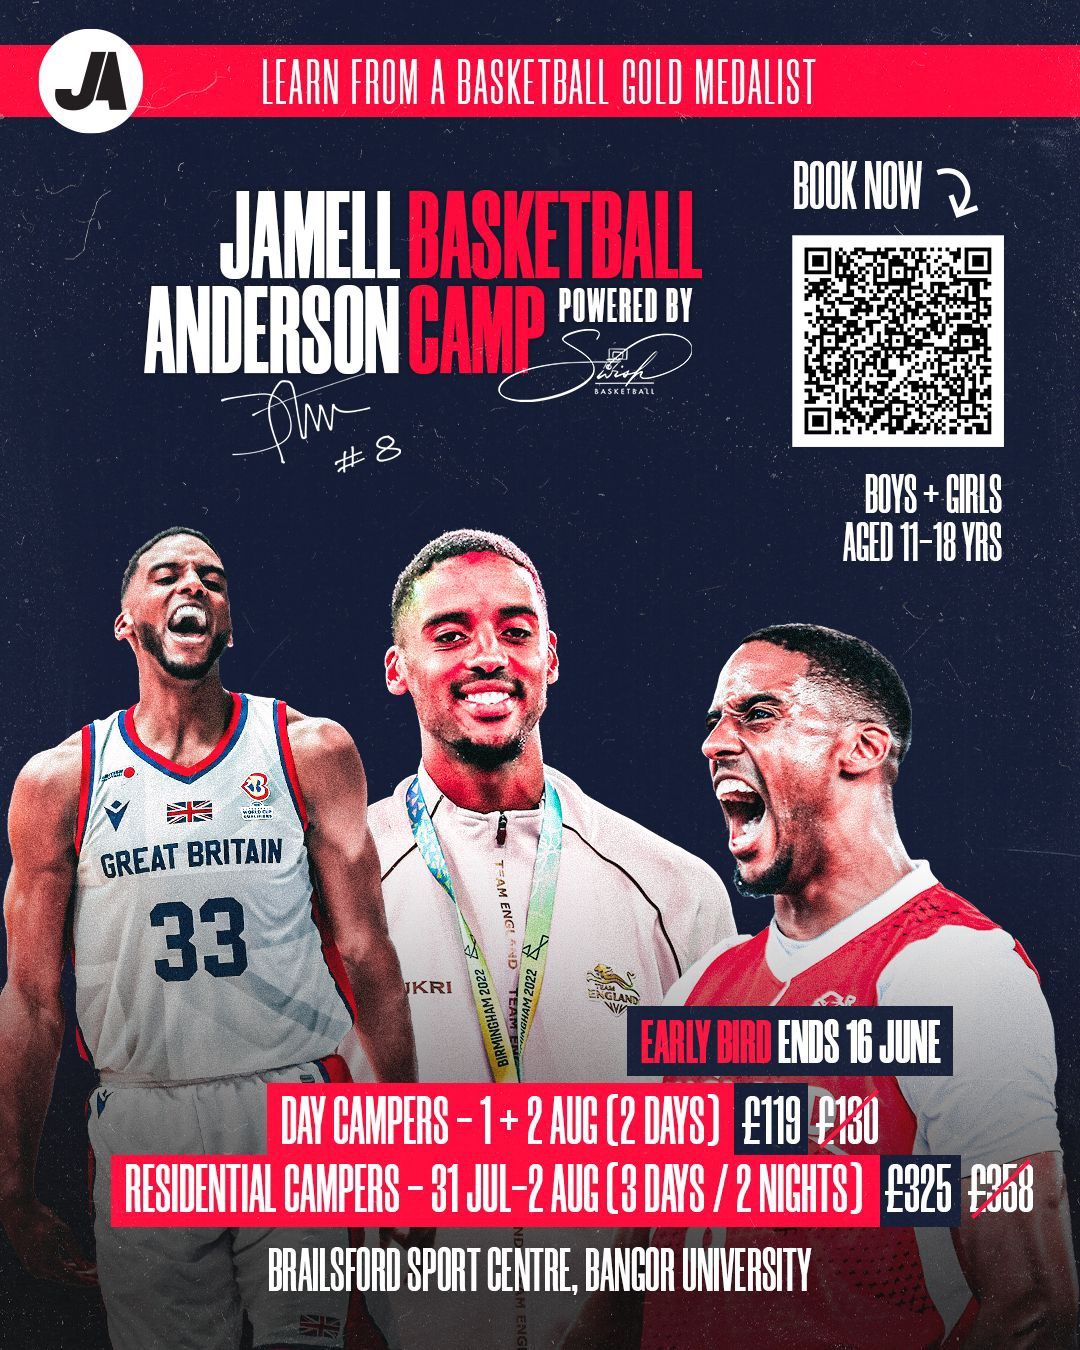 Jamell Anderson Basketball Camp Powered by SWISH 